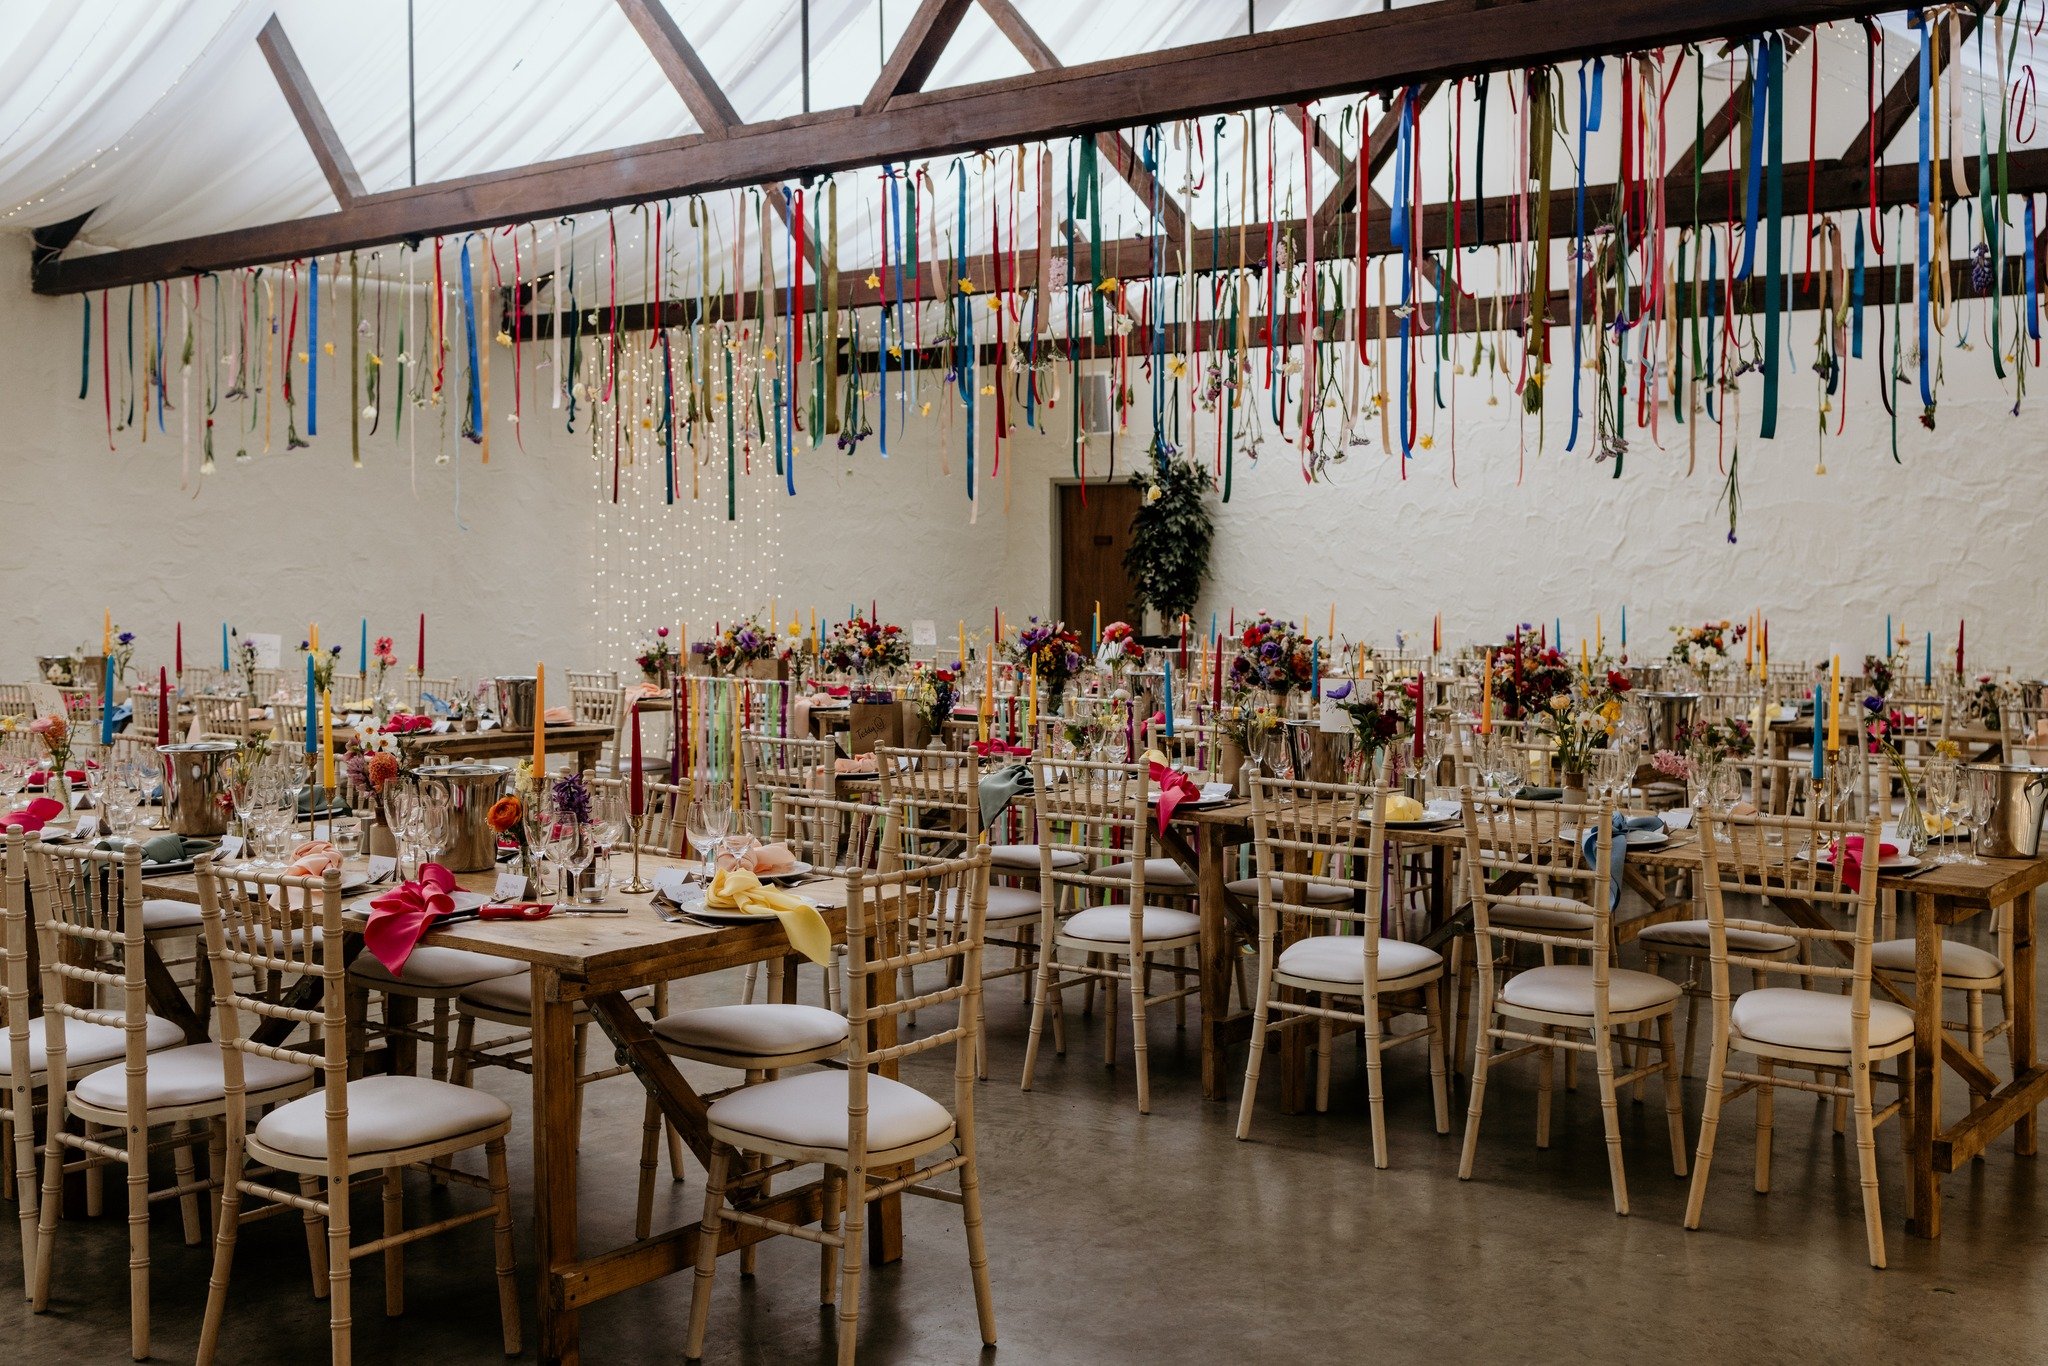 Let's embrace colourful weddings! 🌷🦋🌼🌈

We absolutely LOVED the colourful vibe from Amy &amp; Robbie's wedding in April.

They added multicolored ribbons to their ceremony chairs, and carried on this theme with colourful ribbons and florals drape